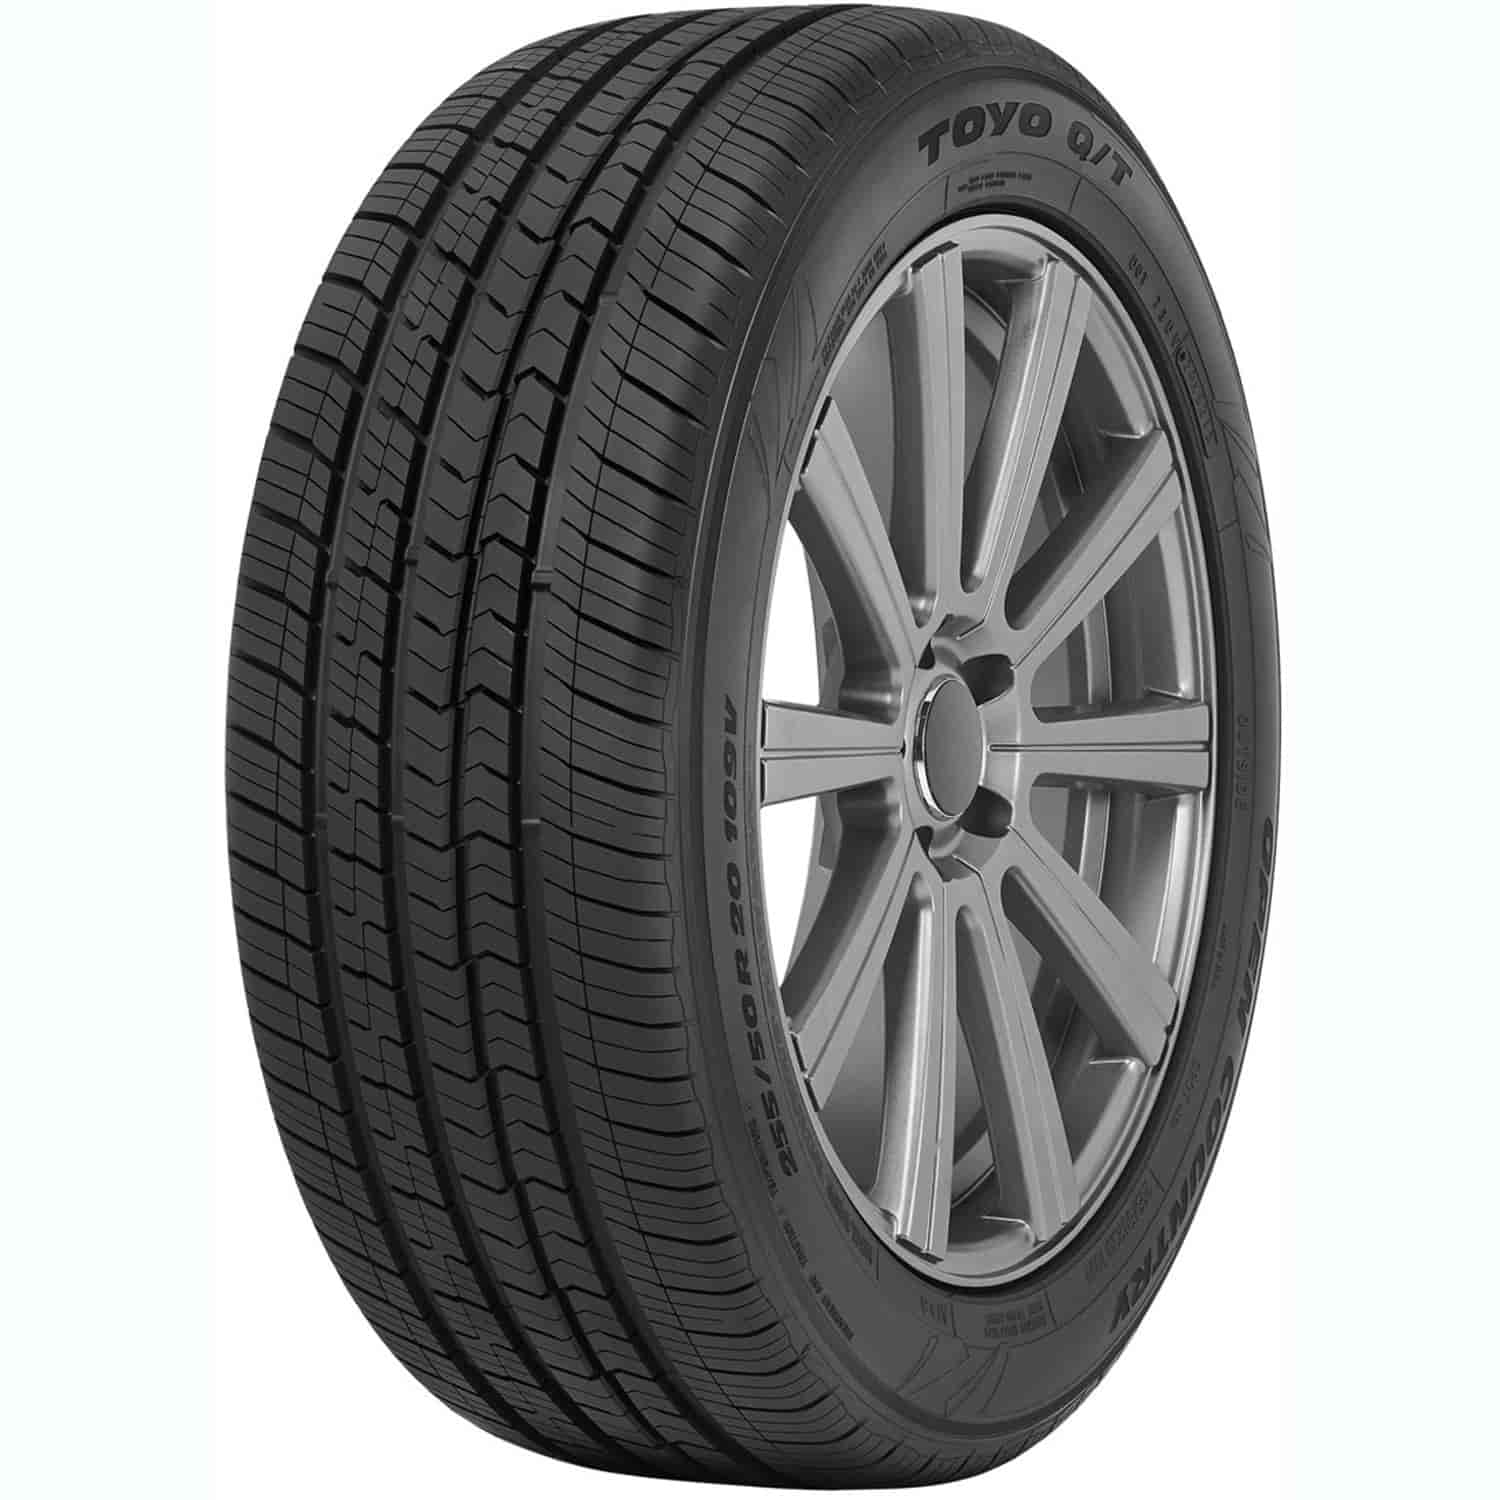 OPEN COUNTRY Q/T P265/70R17 113H